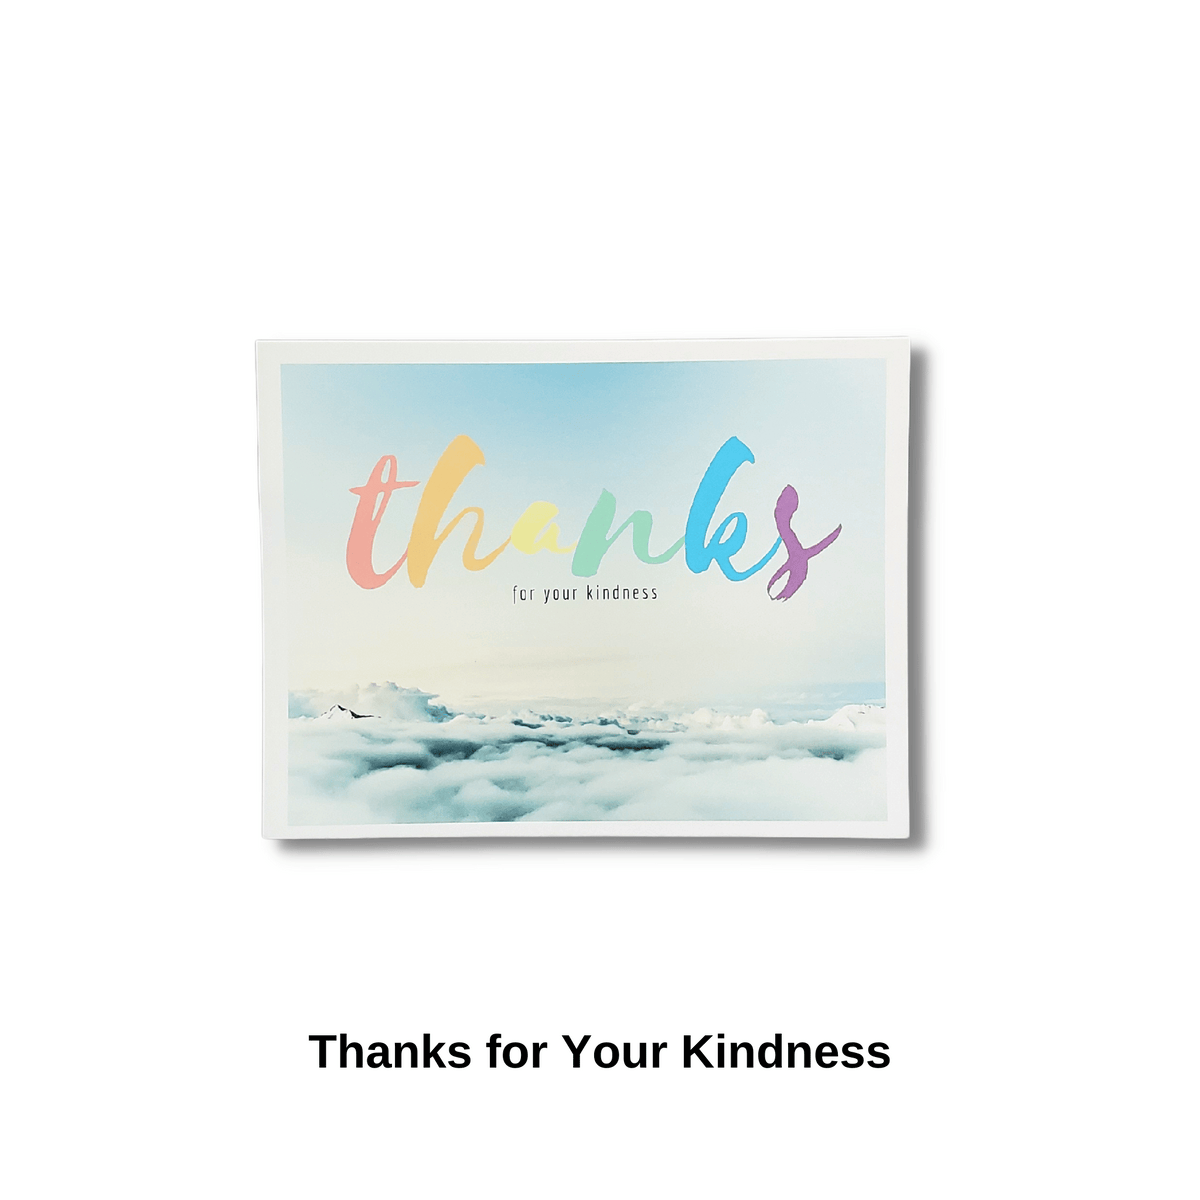 Thanks for Your Kindness Card Pet Greeting Card